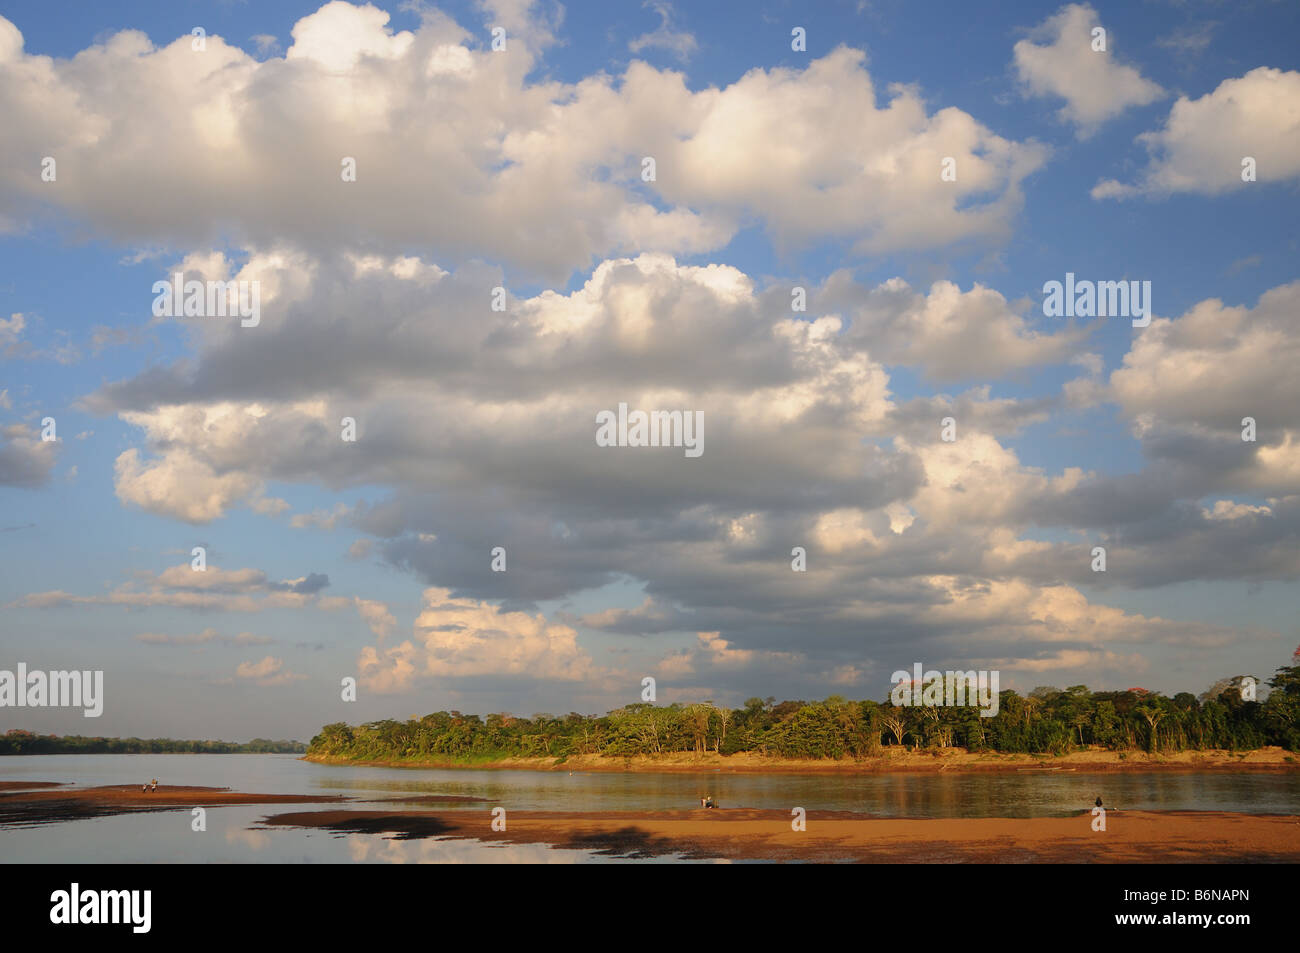 Tropical clouds gather over the rivers and rainforests of Peru's Amazon region. Stock Photo